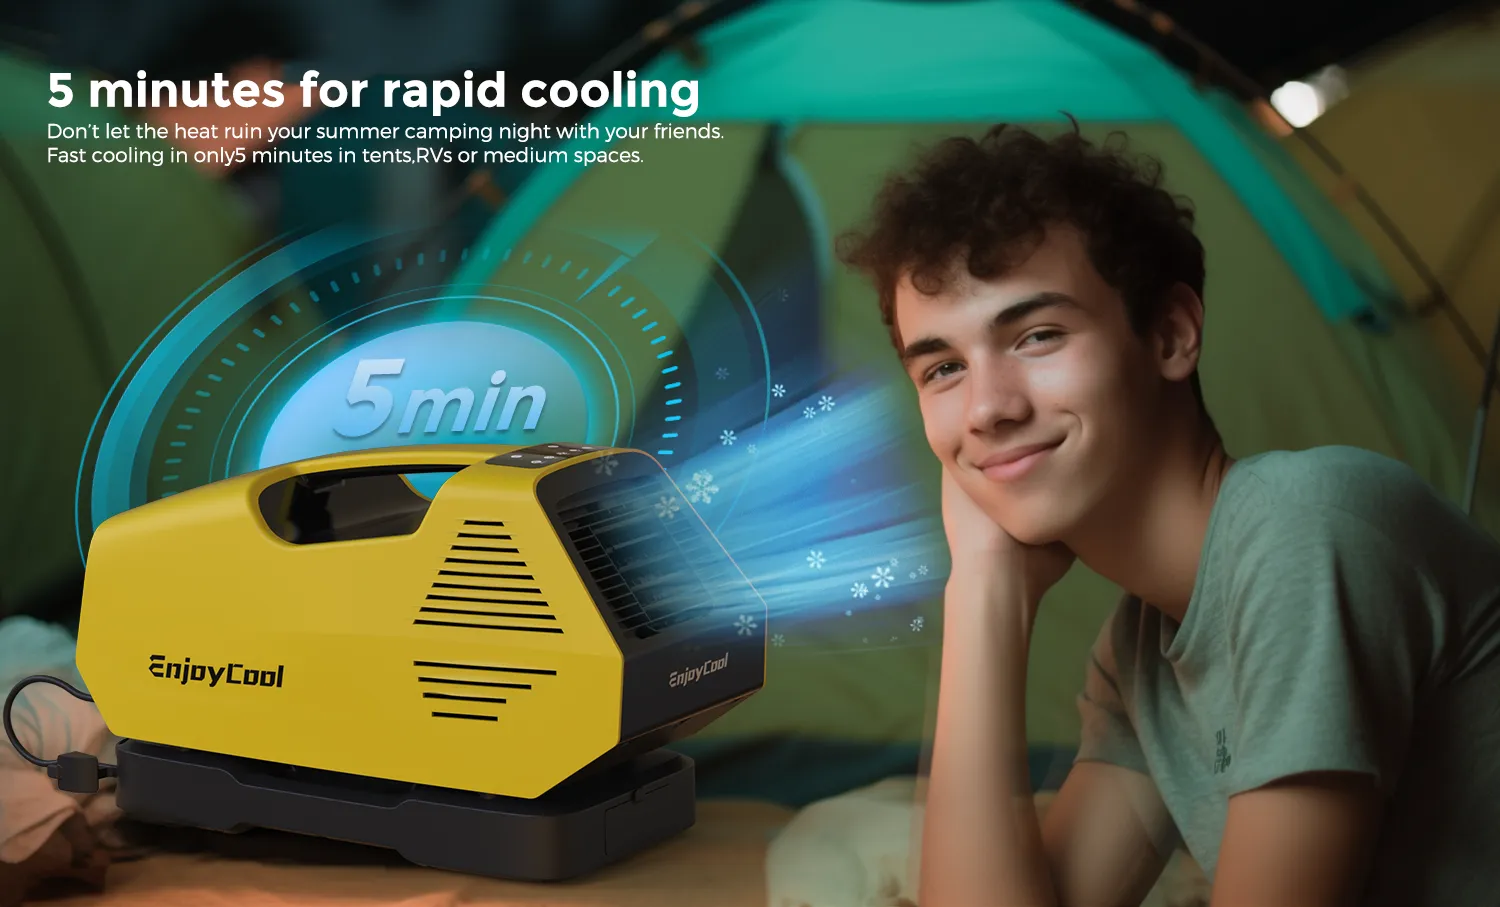 EnjoyCool Link2 Portable Outdoor Air Conditioner Fast Cooling